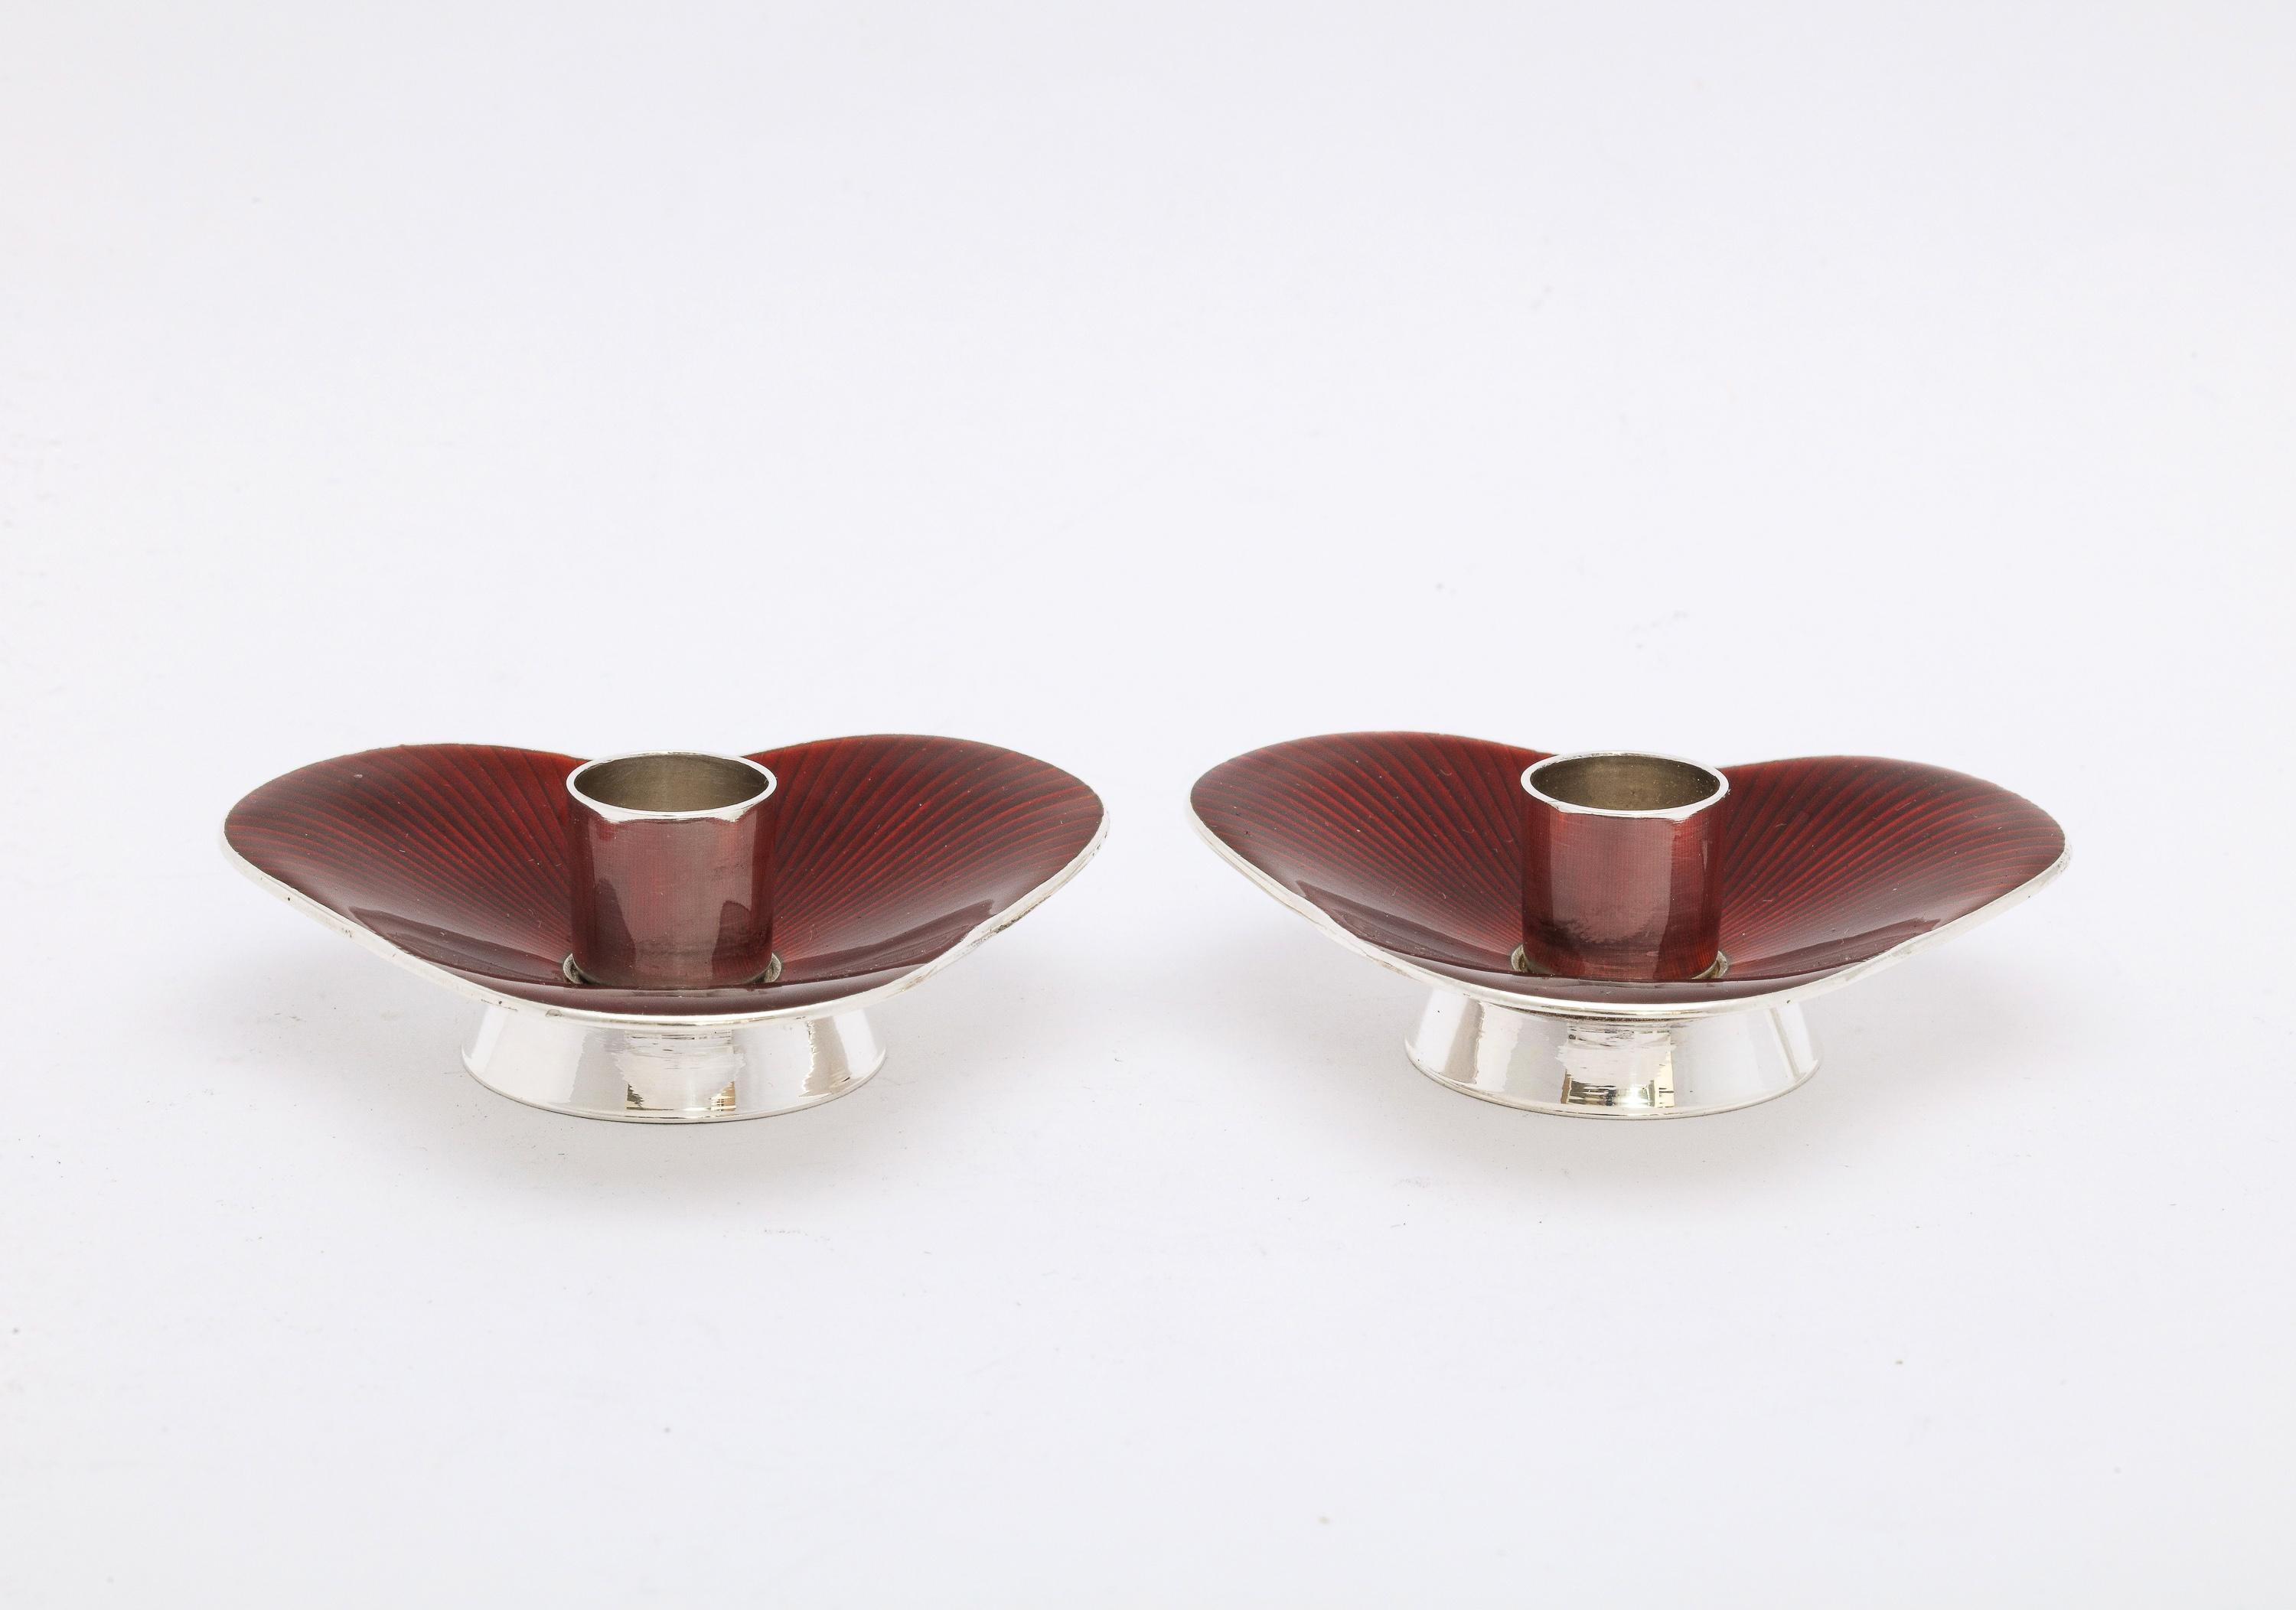 Pair of Mid-Century Modern Sterling Silver and Bright Red Enamel Candlesticks In Good Condition For Sale In New York, NY